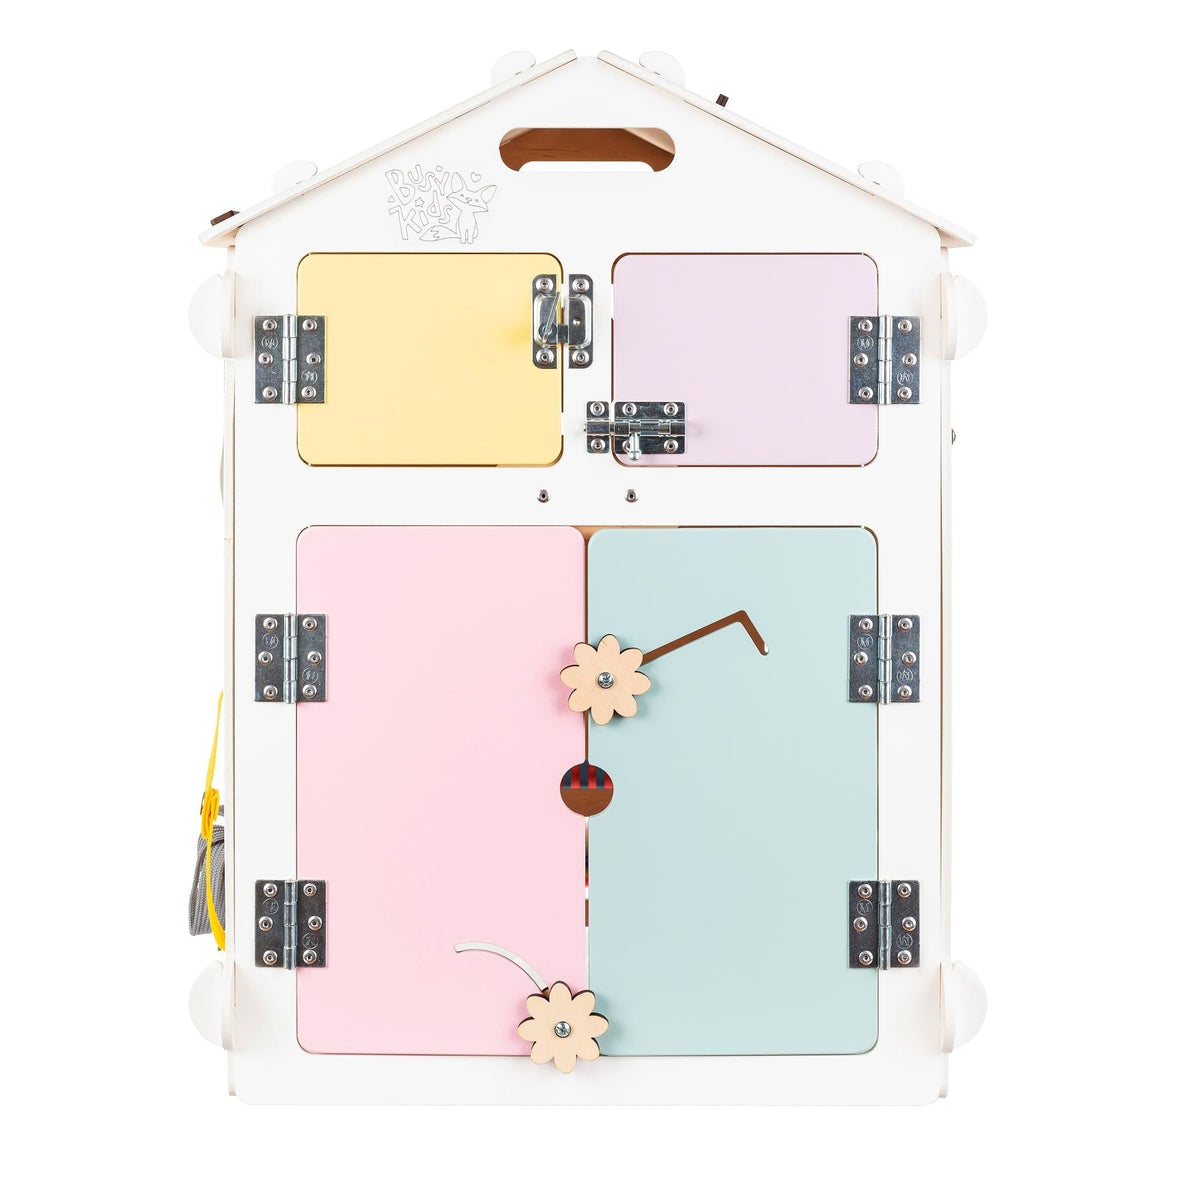 Busy House Pastell Weiss - Activity Board Montessori® by Busy Kids